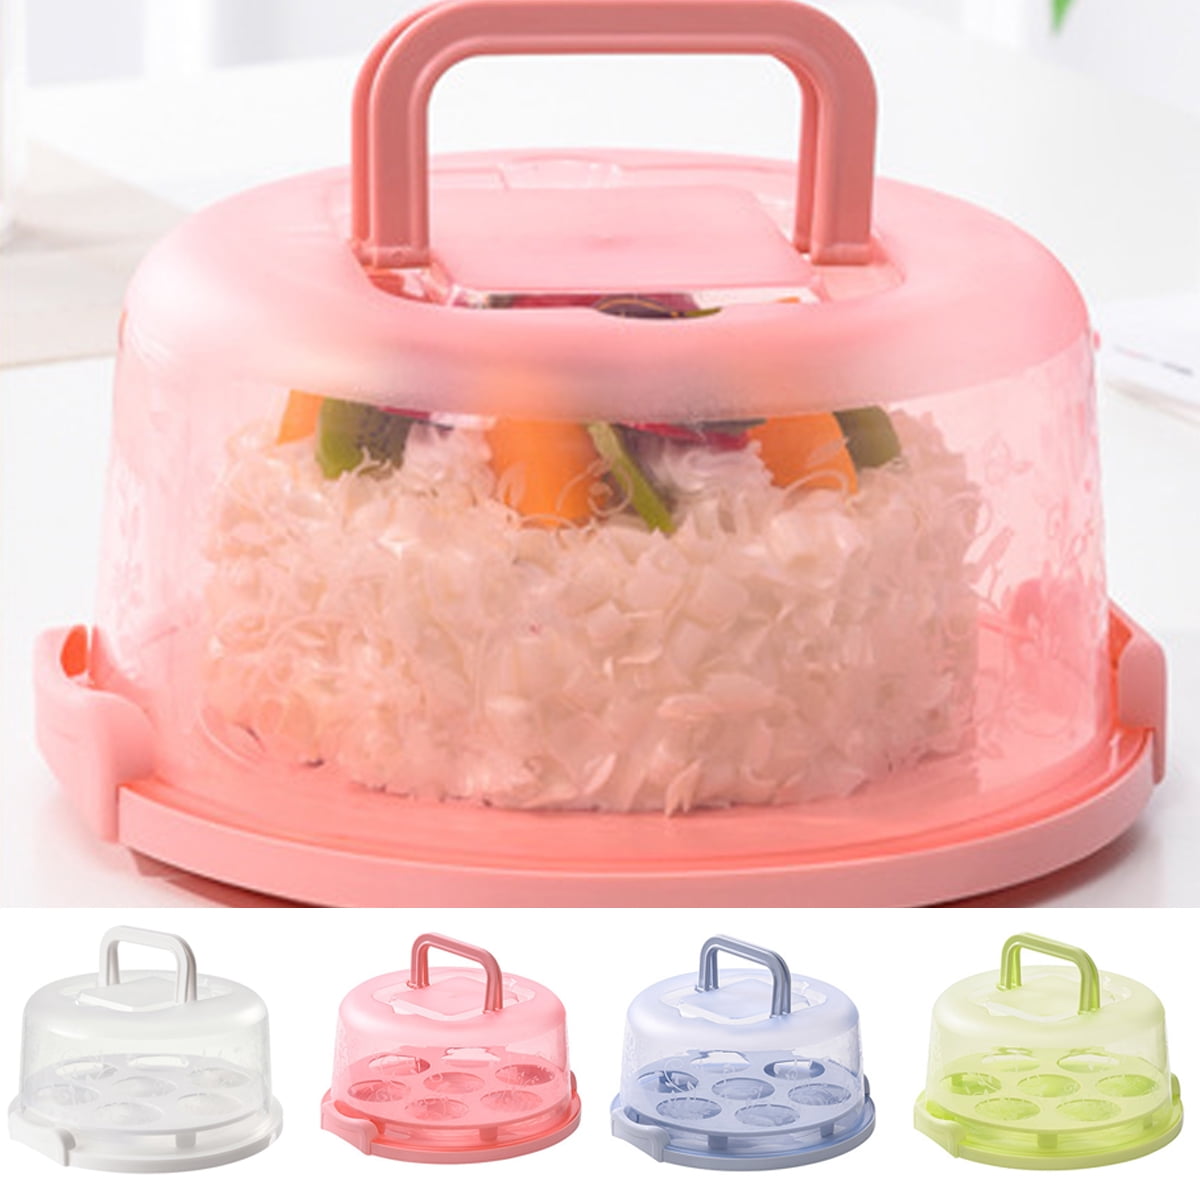 FEOOWV Plastic Cake and Cupcake Carrier Holder, Large Portable Storage  Container for Storing 12 Cupcakes or 1 Large Cake, White